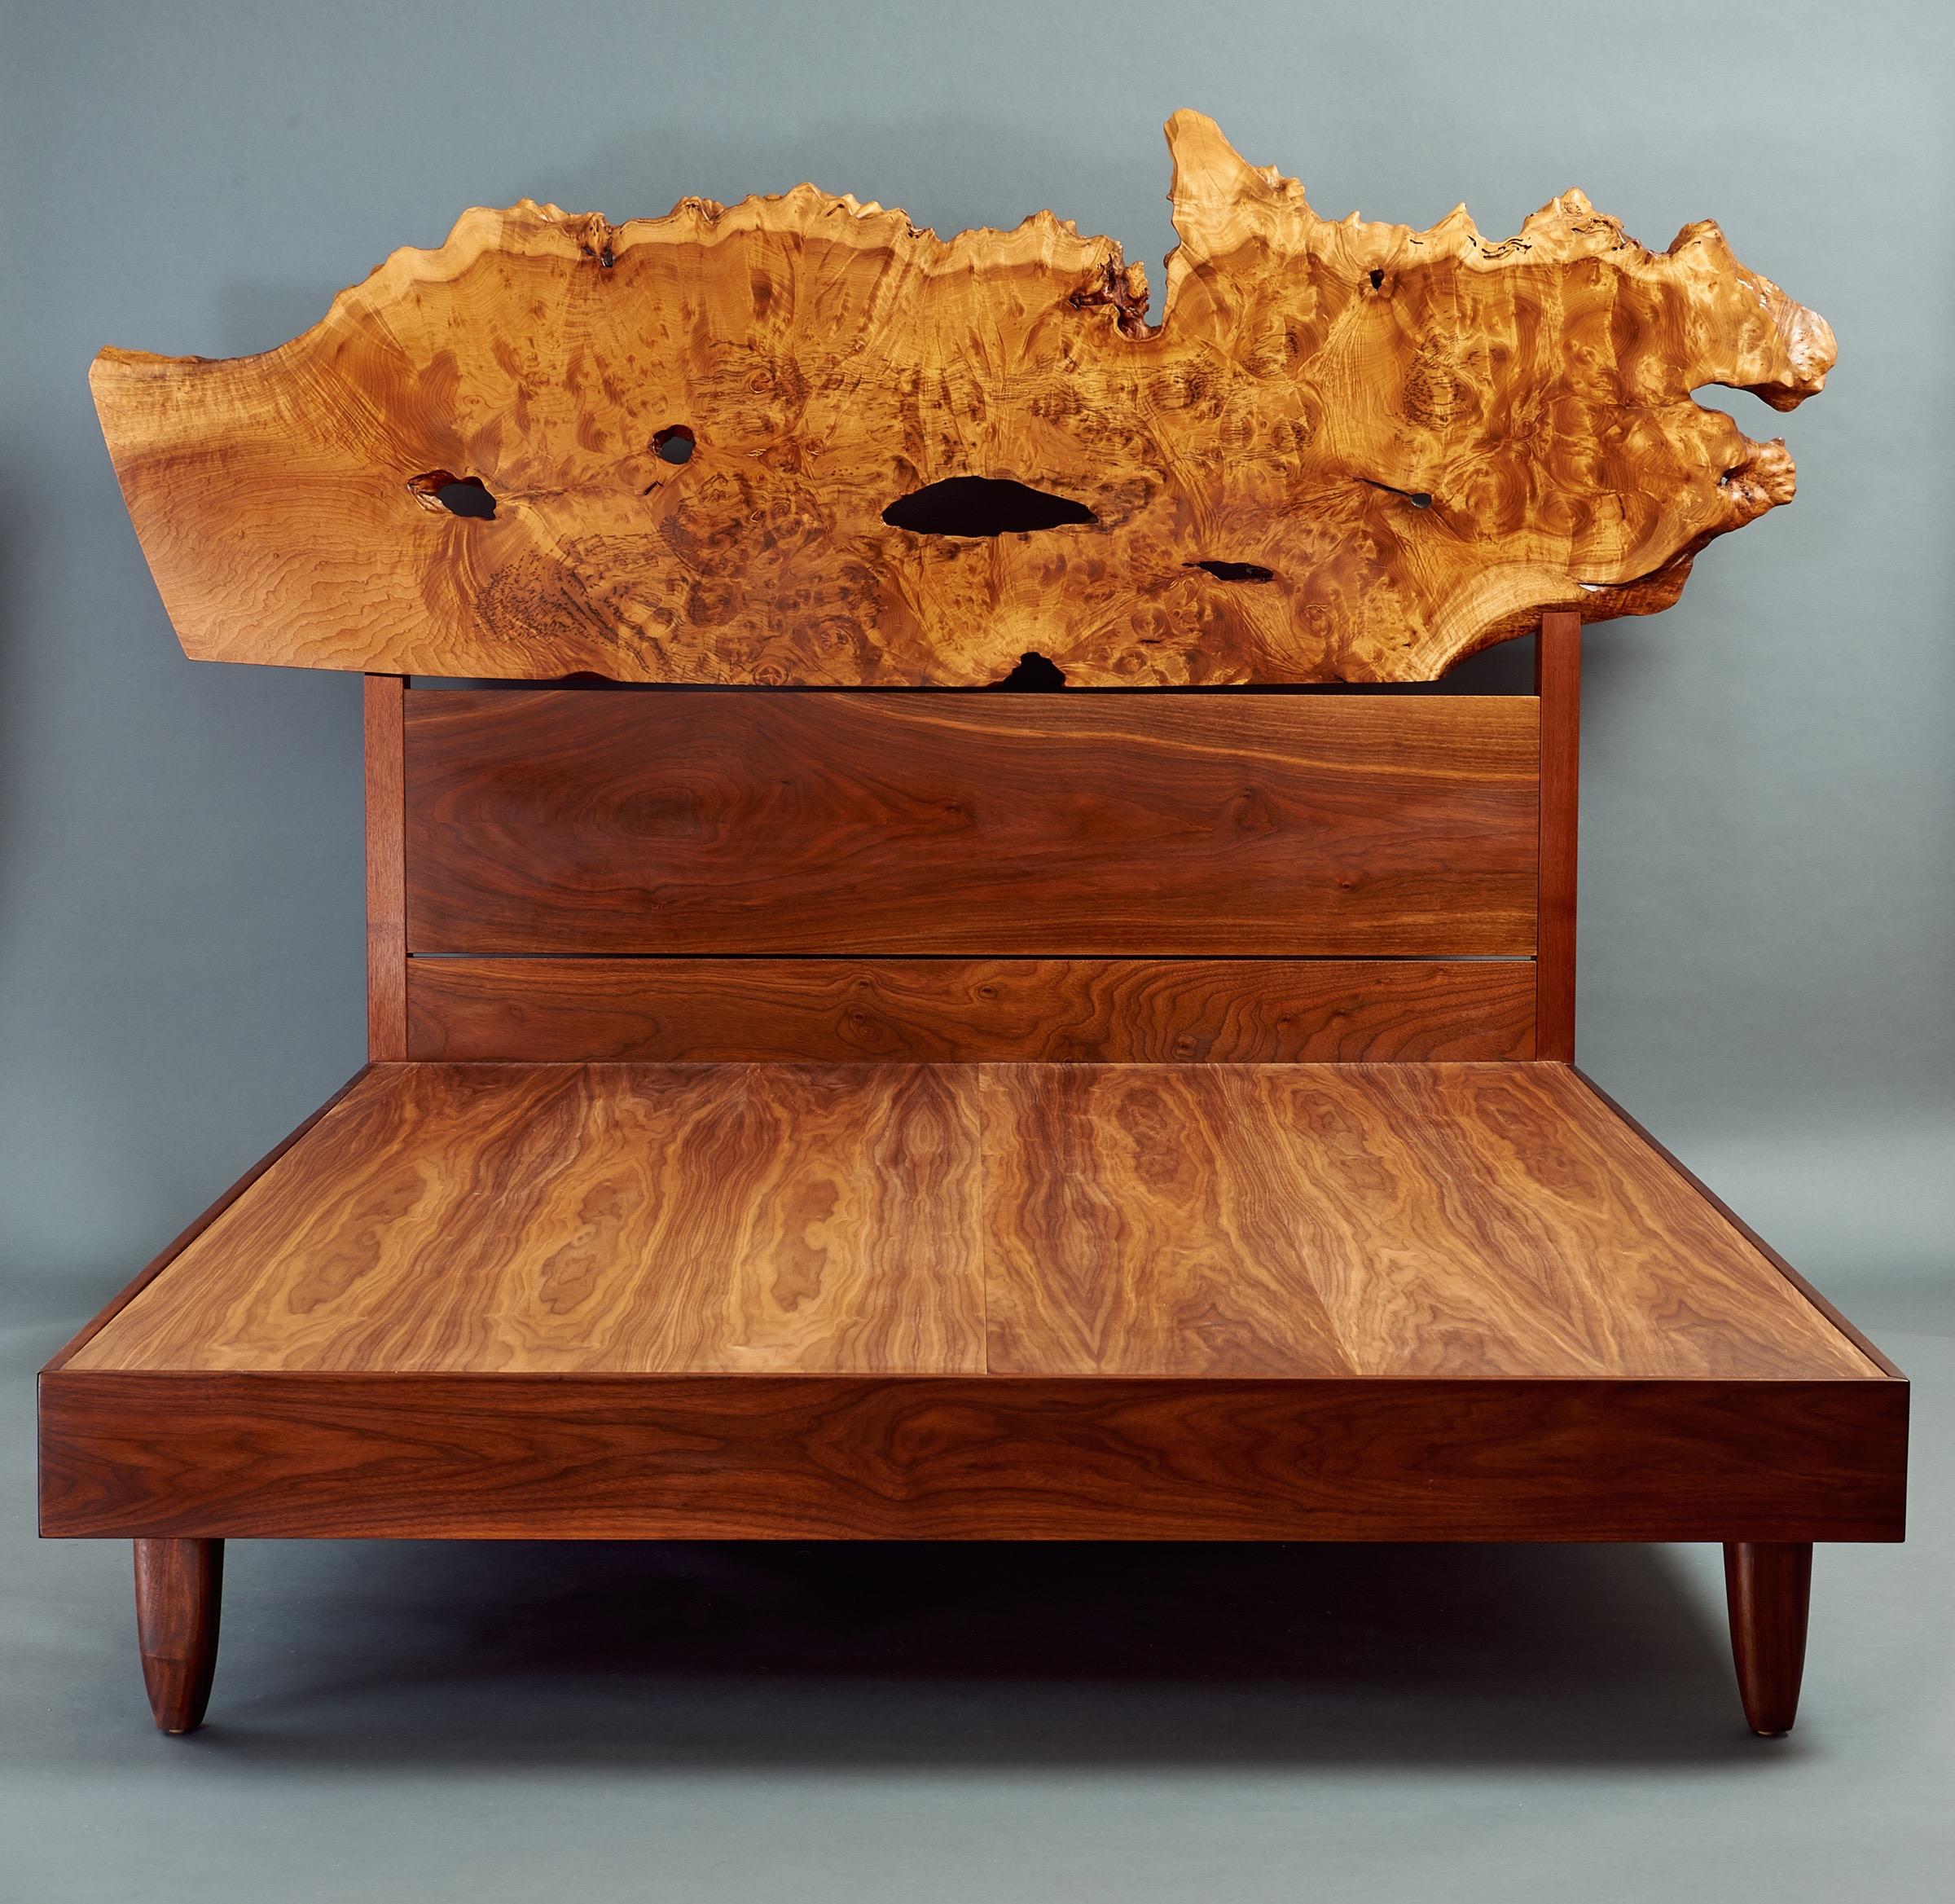 Mira Nakashima (b. 1942) 

A one of a kind, queen-size bed with an exquisite free-form headboard in myrtle burl and black walnut by Mira Nakashima, George Nakashima's heir. A master craftsperson who honed her artisan's hand and artist's eye at her